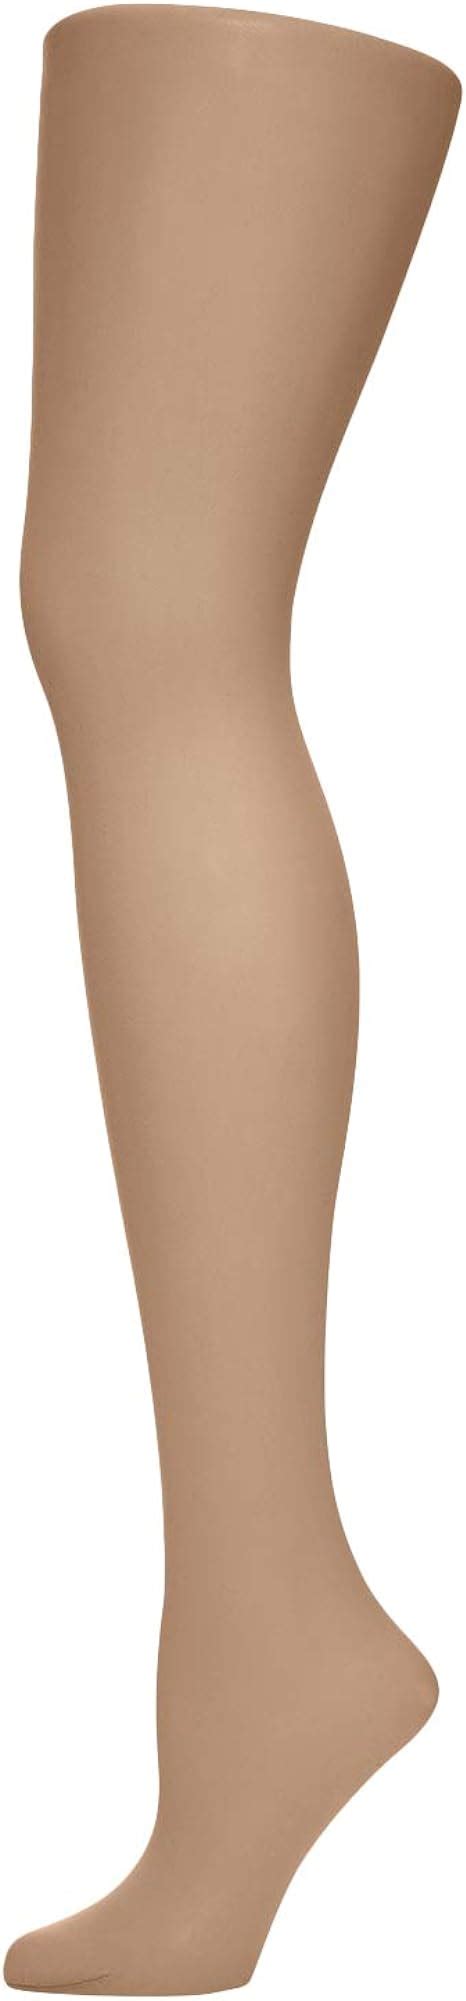 wolford fatal 15 seamless tights uk clothing